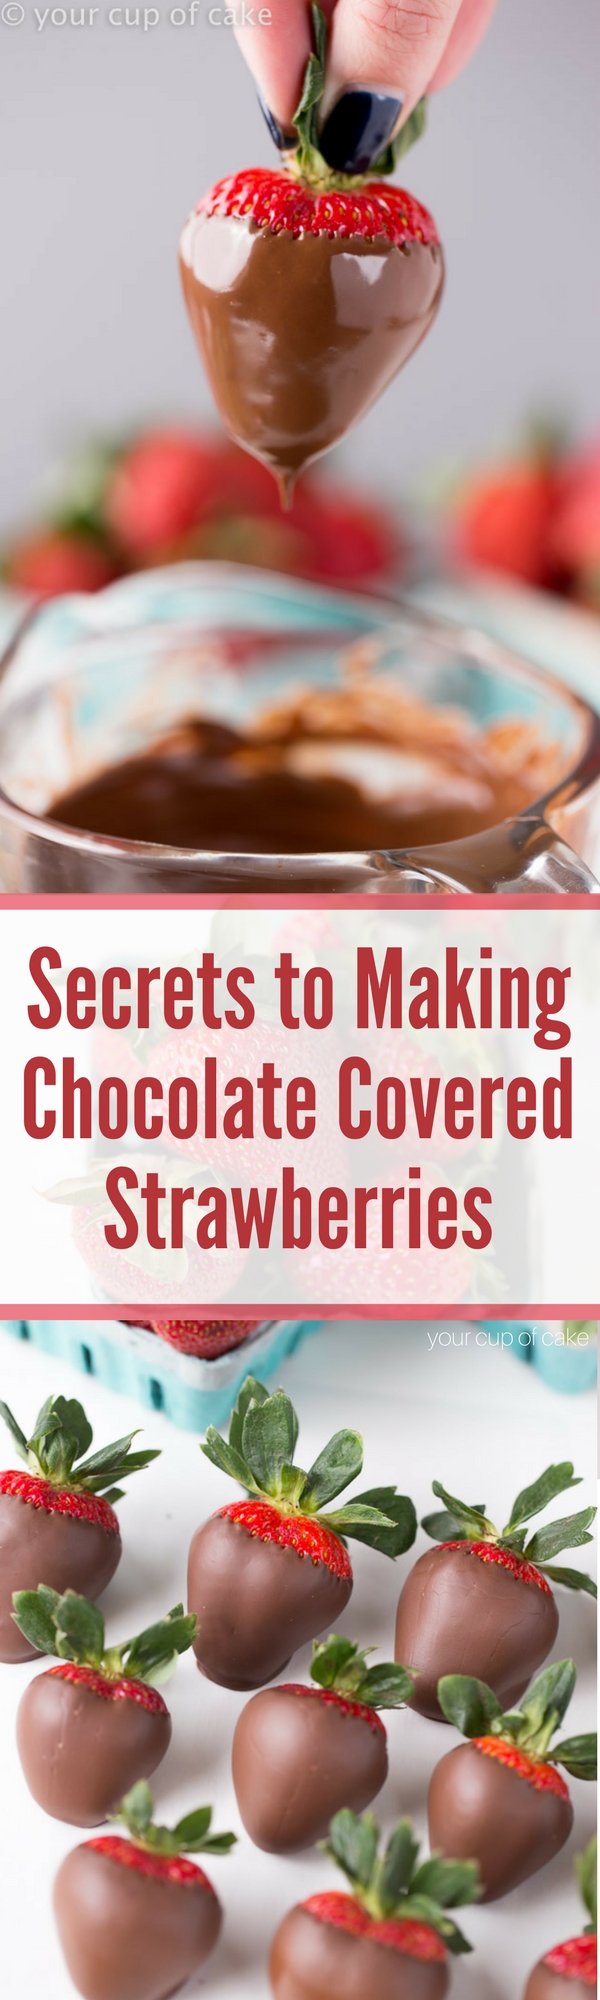 Secrets to Making Perfect Chocolate Covered Strawberries - Your Cup of Cake